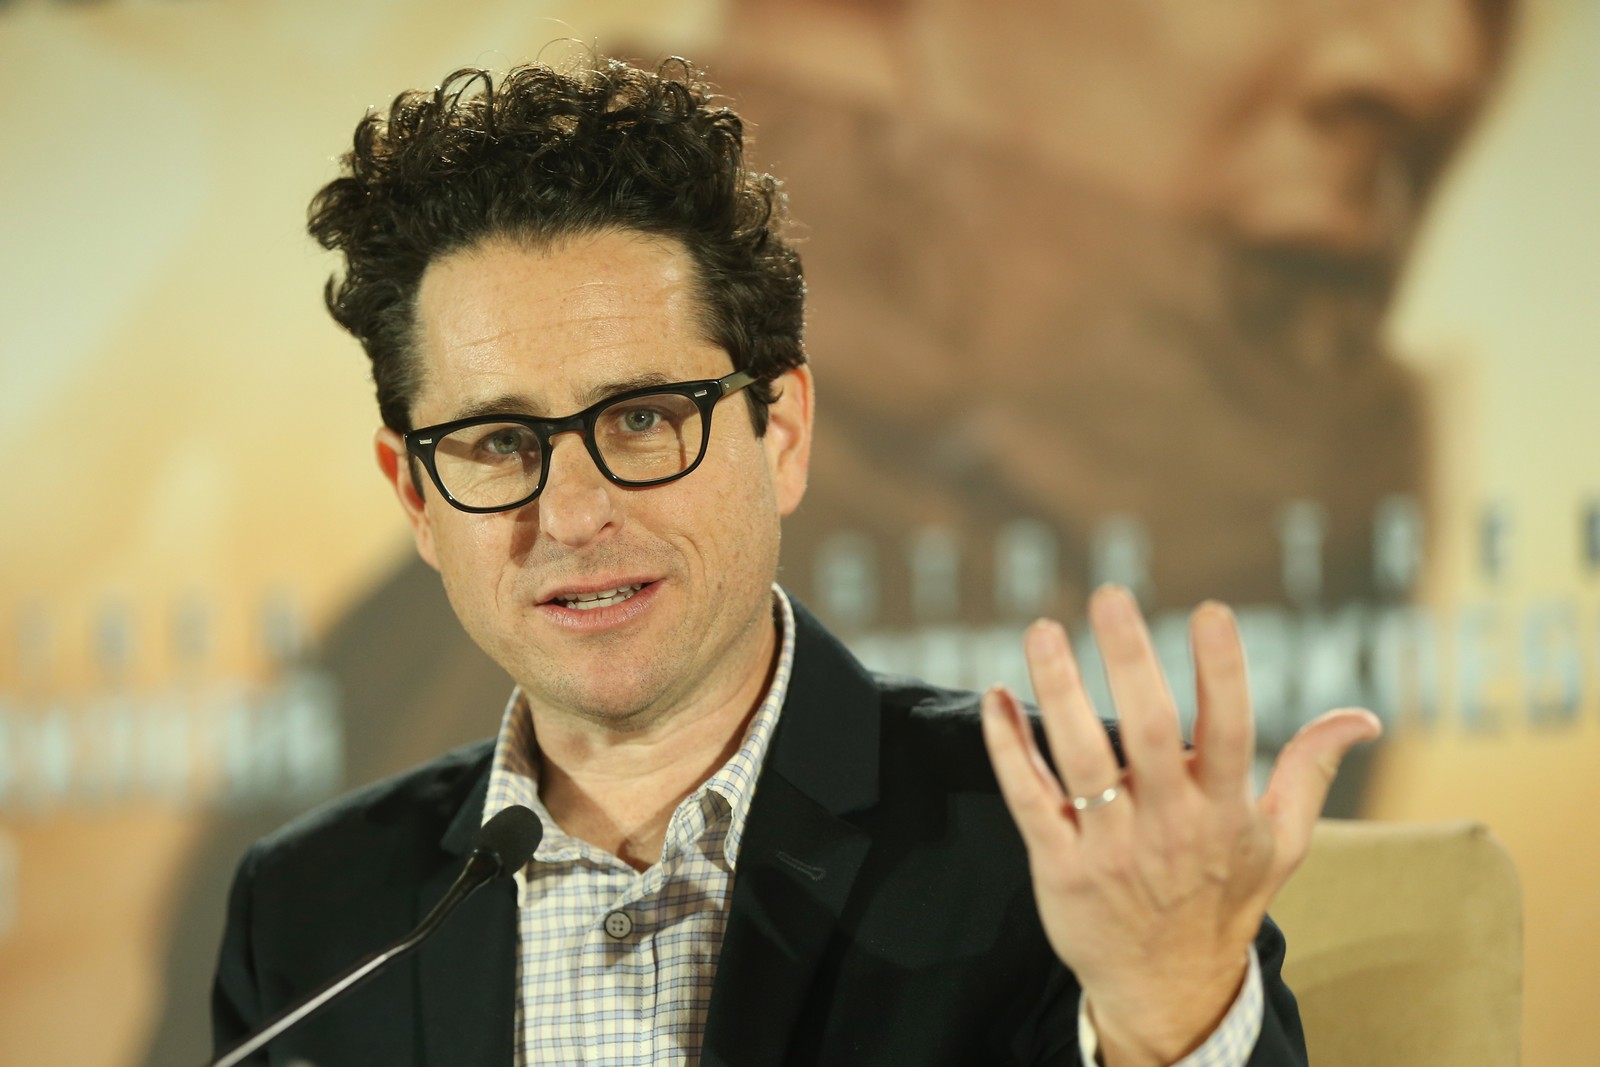 BERLIN, GERMANY - APRIL 29: Director J.J. Abrams attends the 'Star Trek Into Darkness' Press Conference at Hotel Adlon on April 29, 2013 in Berlin, Germany. (Photo by Sean Gallup/Getty Images for Paramount Pictures) *** Local Caption *** J.J. Abrams